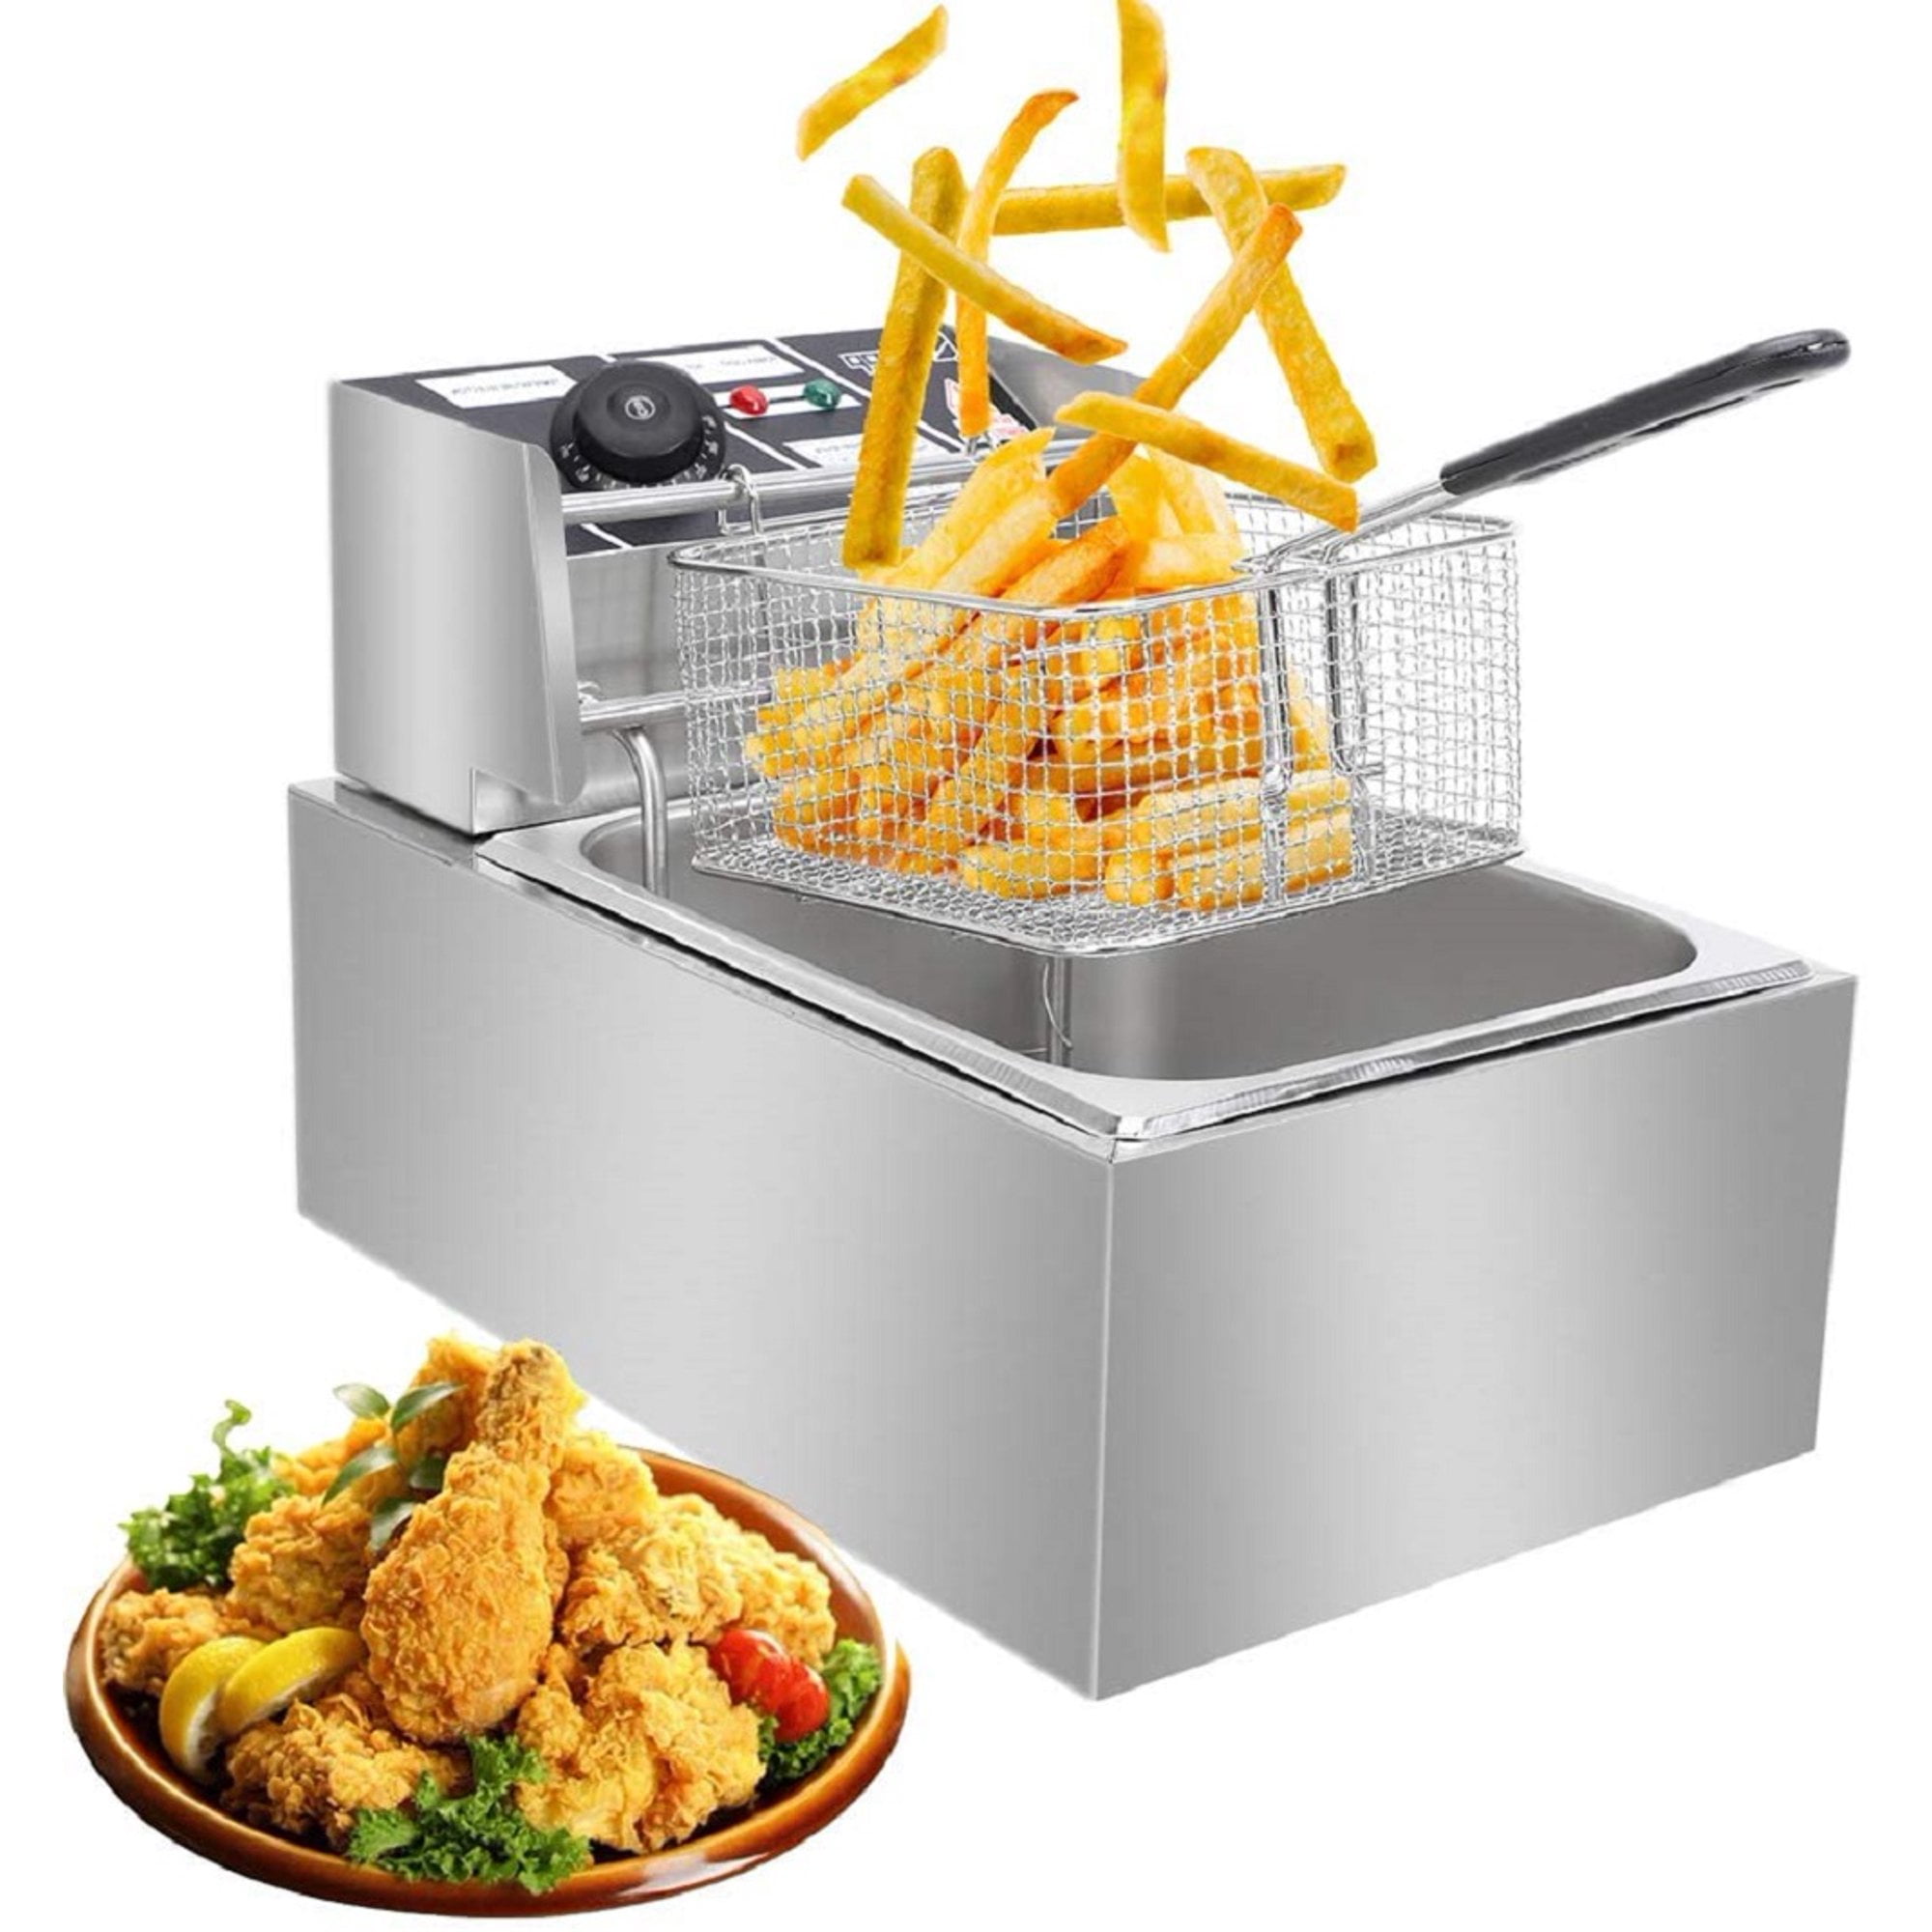 2500W 6L Stainless Steel Electric Deep Fryer Home Commercial Restaurant 6.3QT 